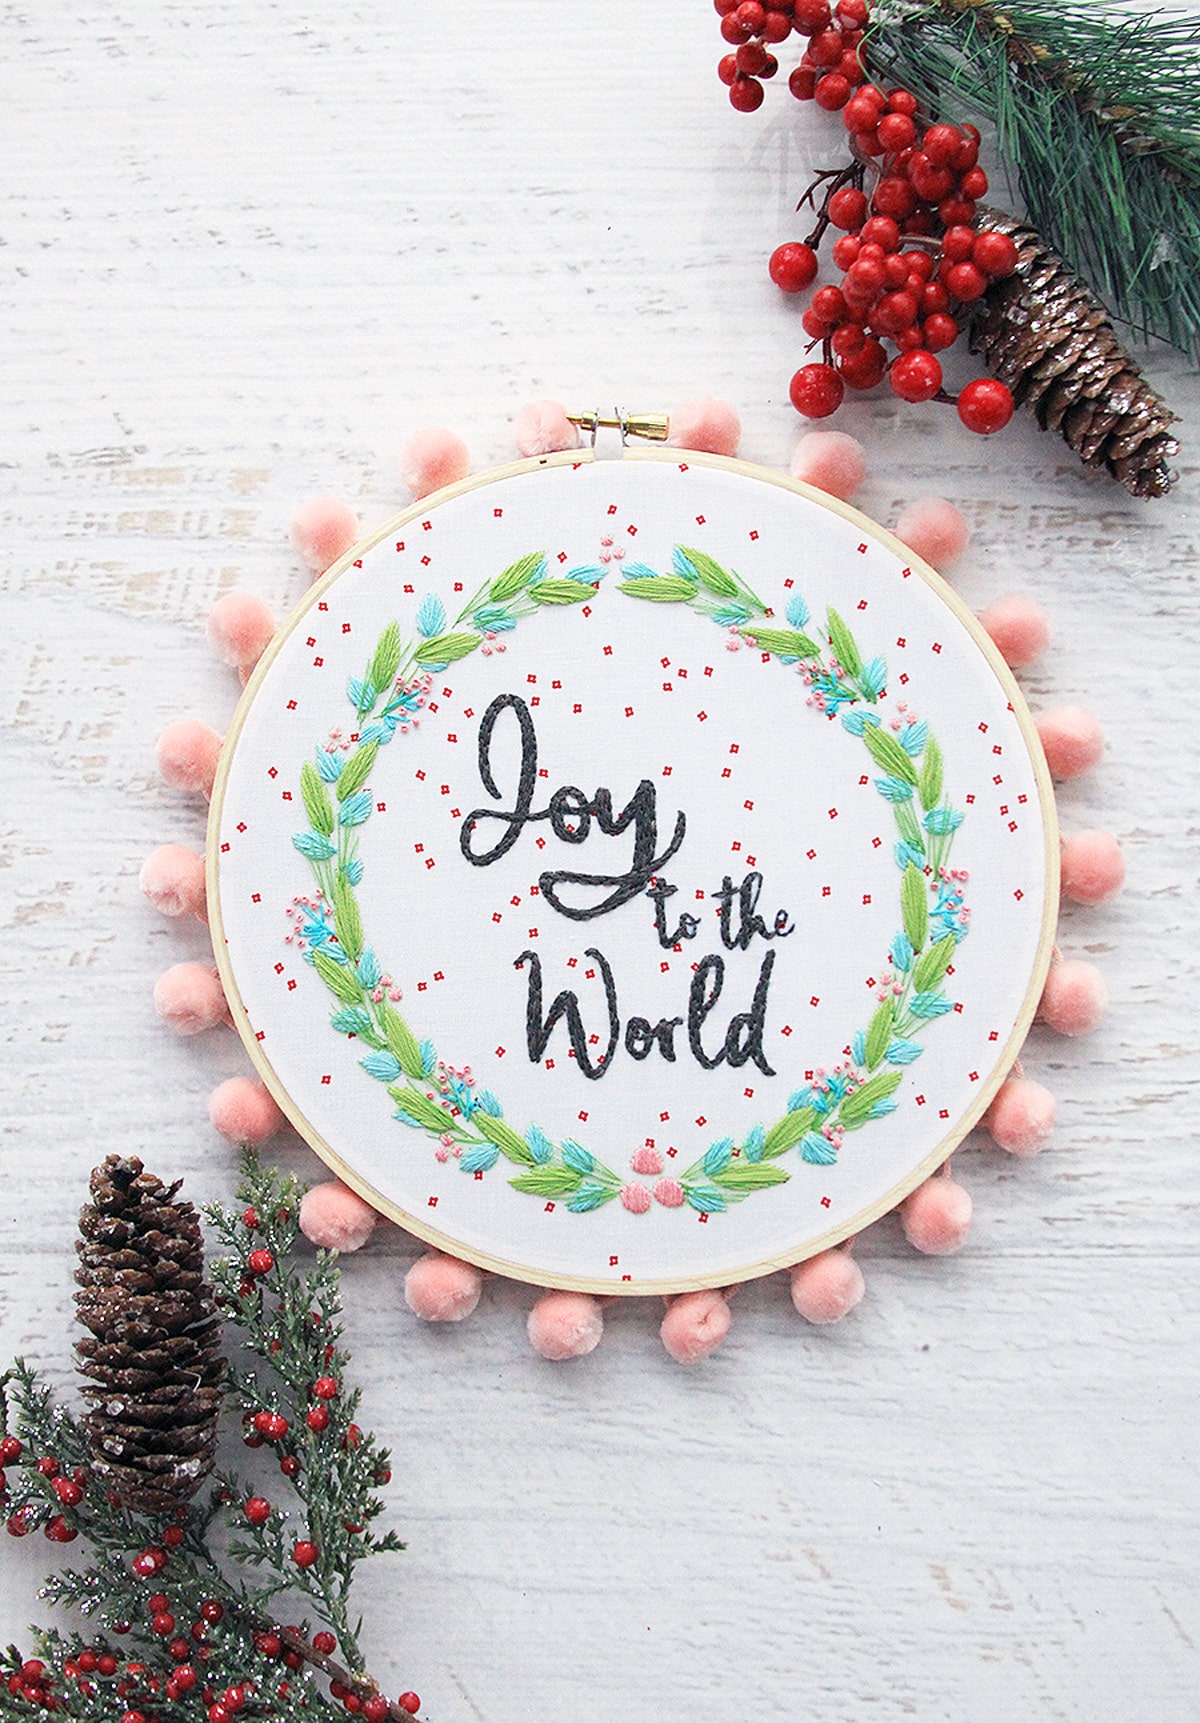 embroider a lovely 'Joy to the World' hoop